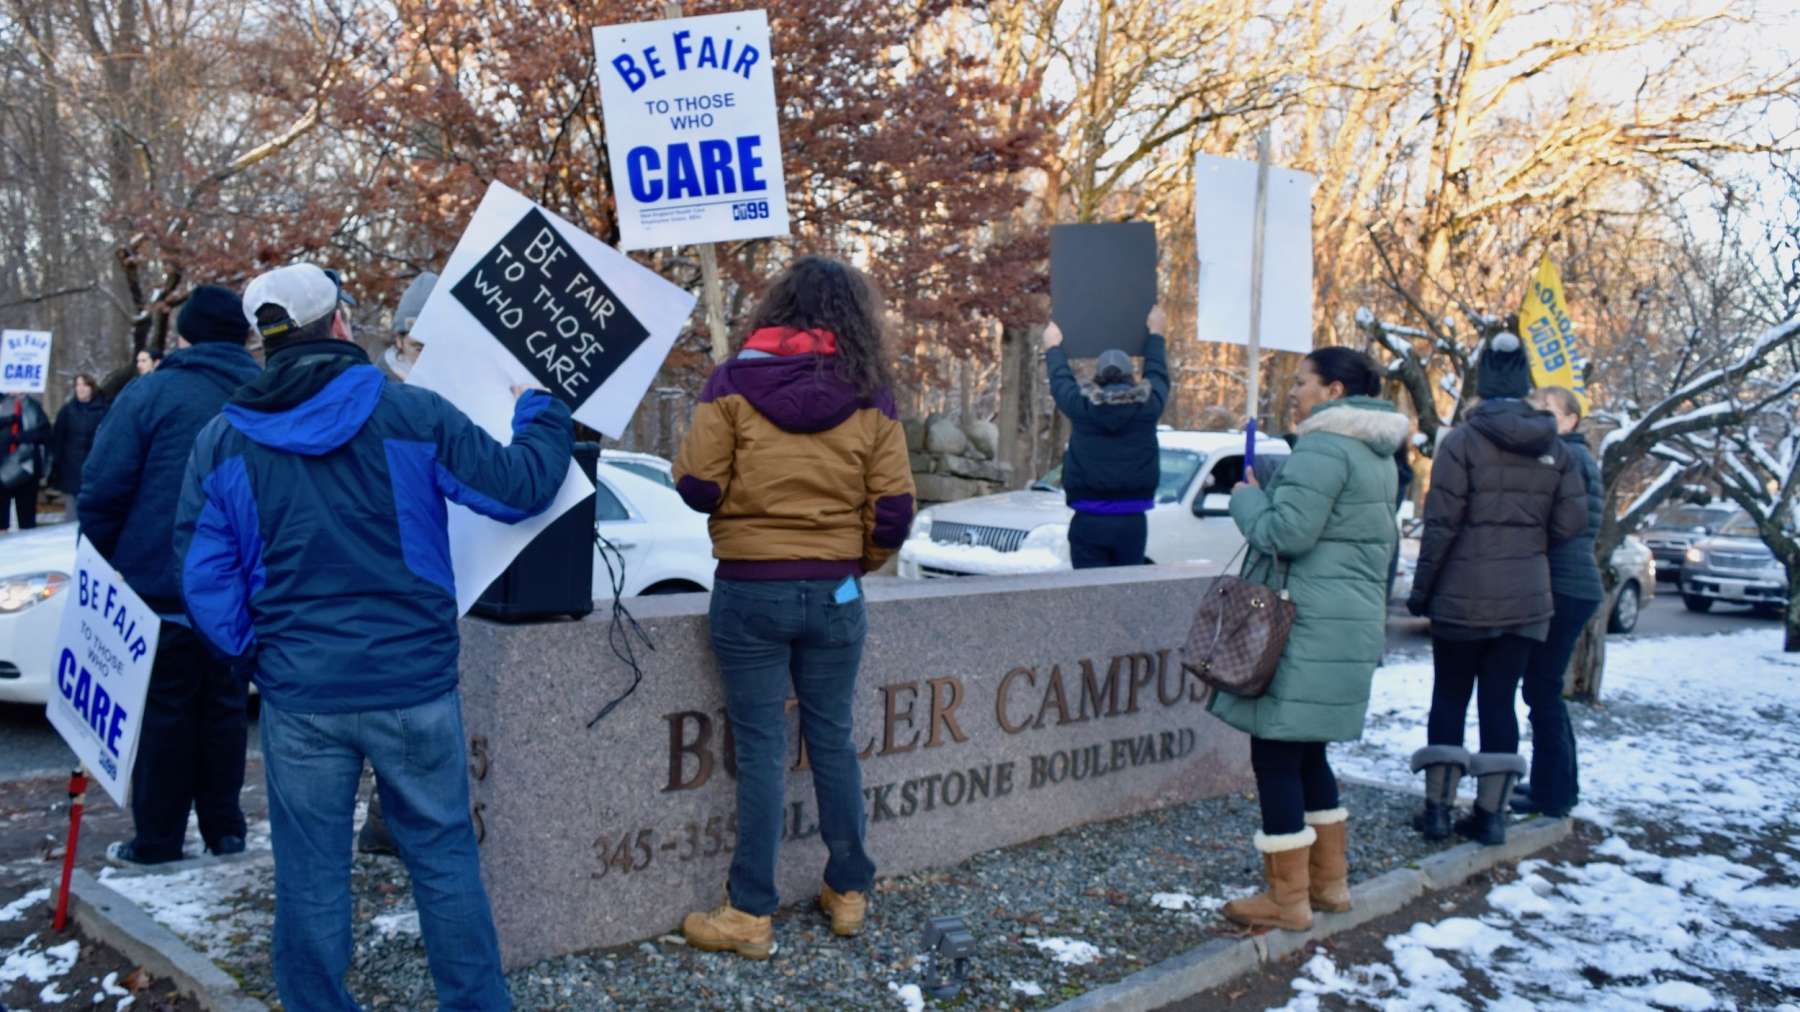 Rhode Island News: Butler Hospital workers picket for patient safety and to protect good jobs